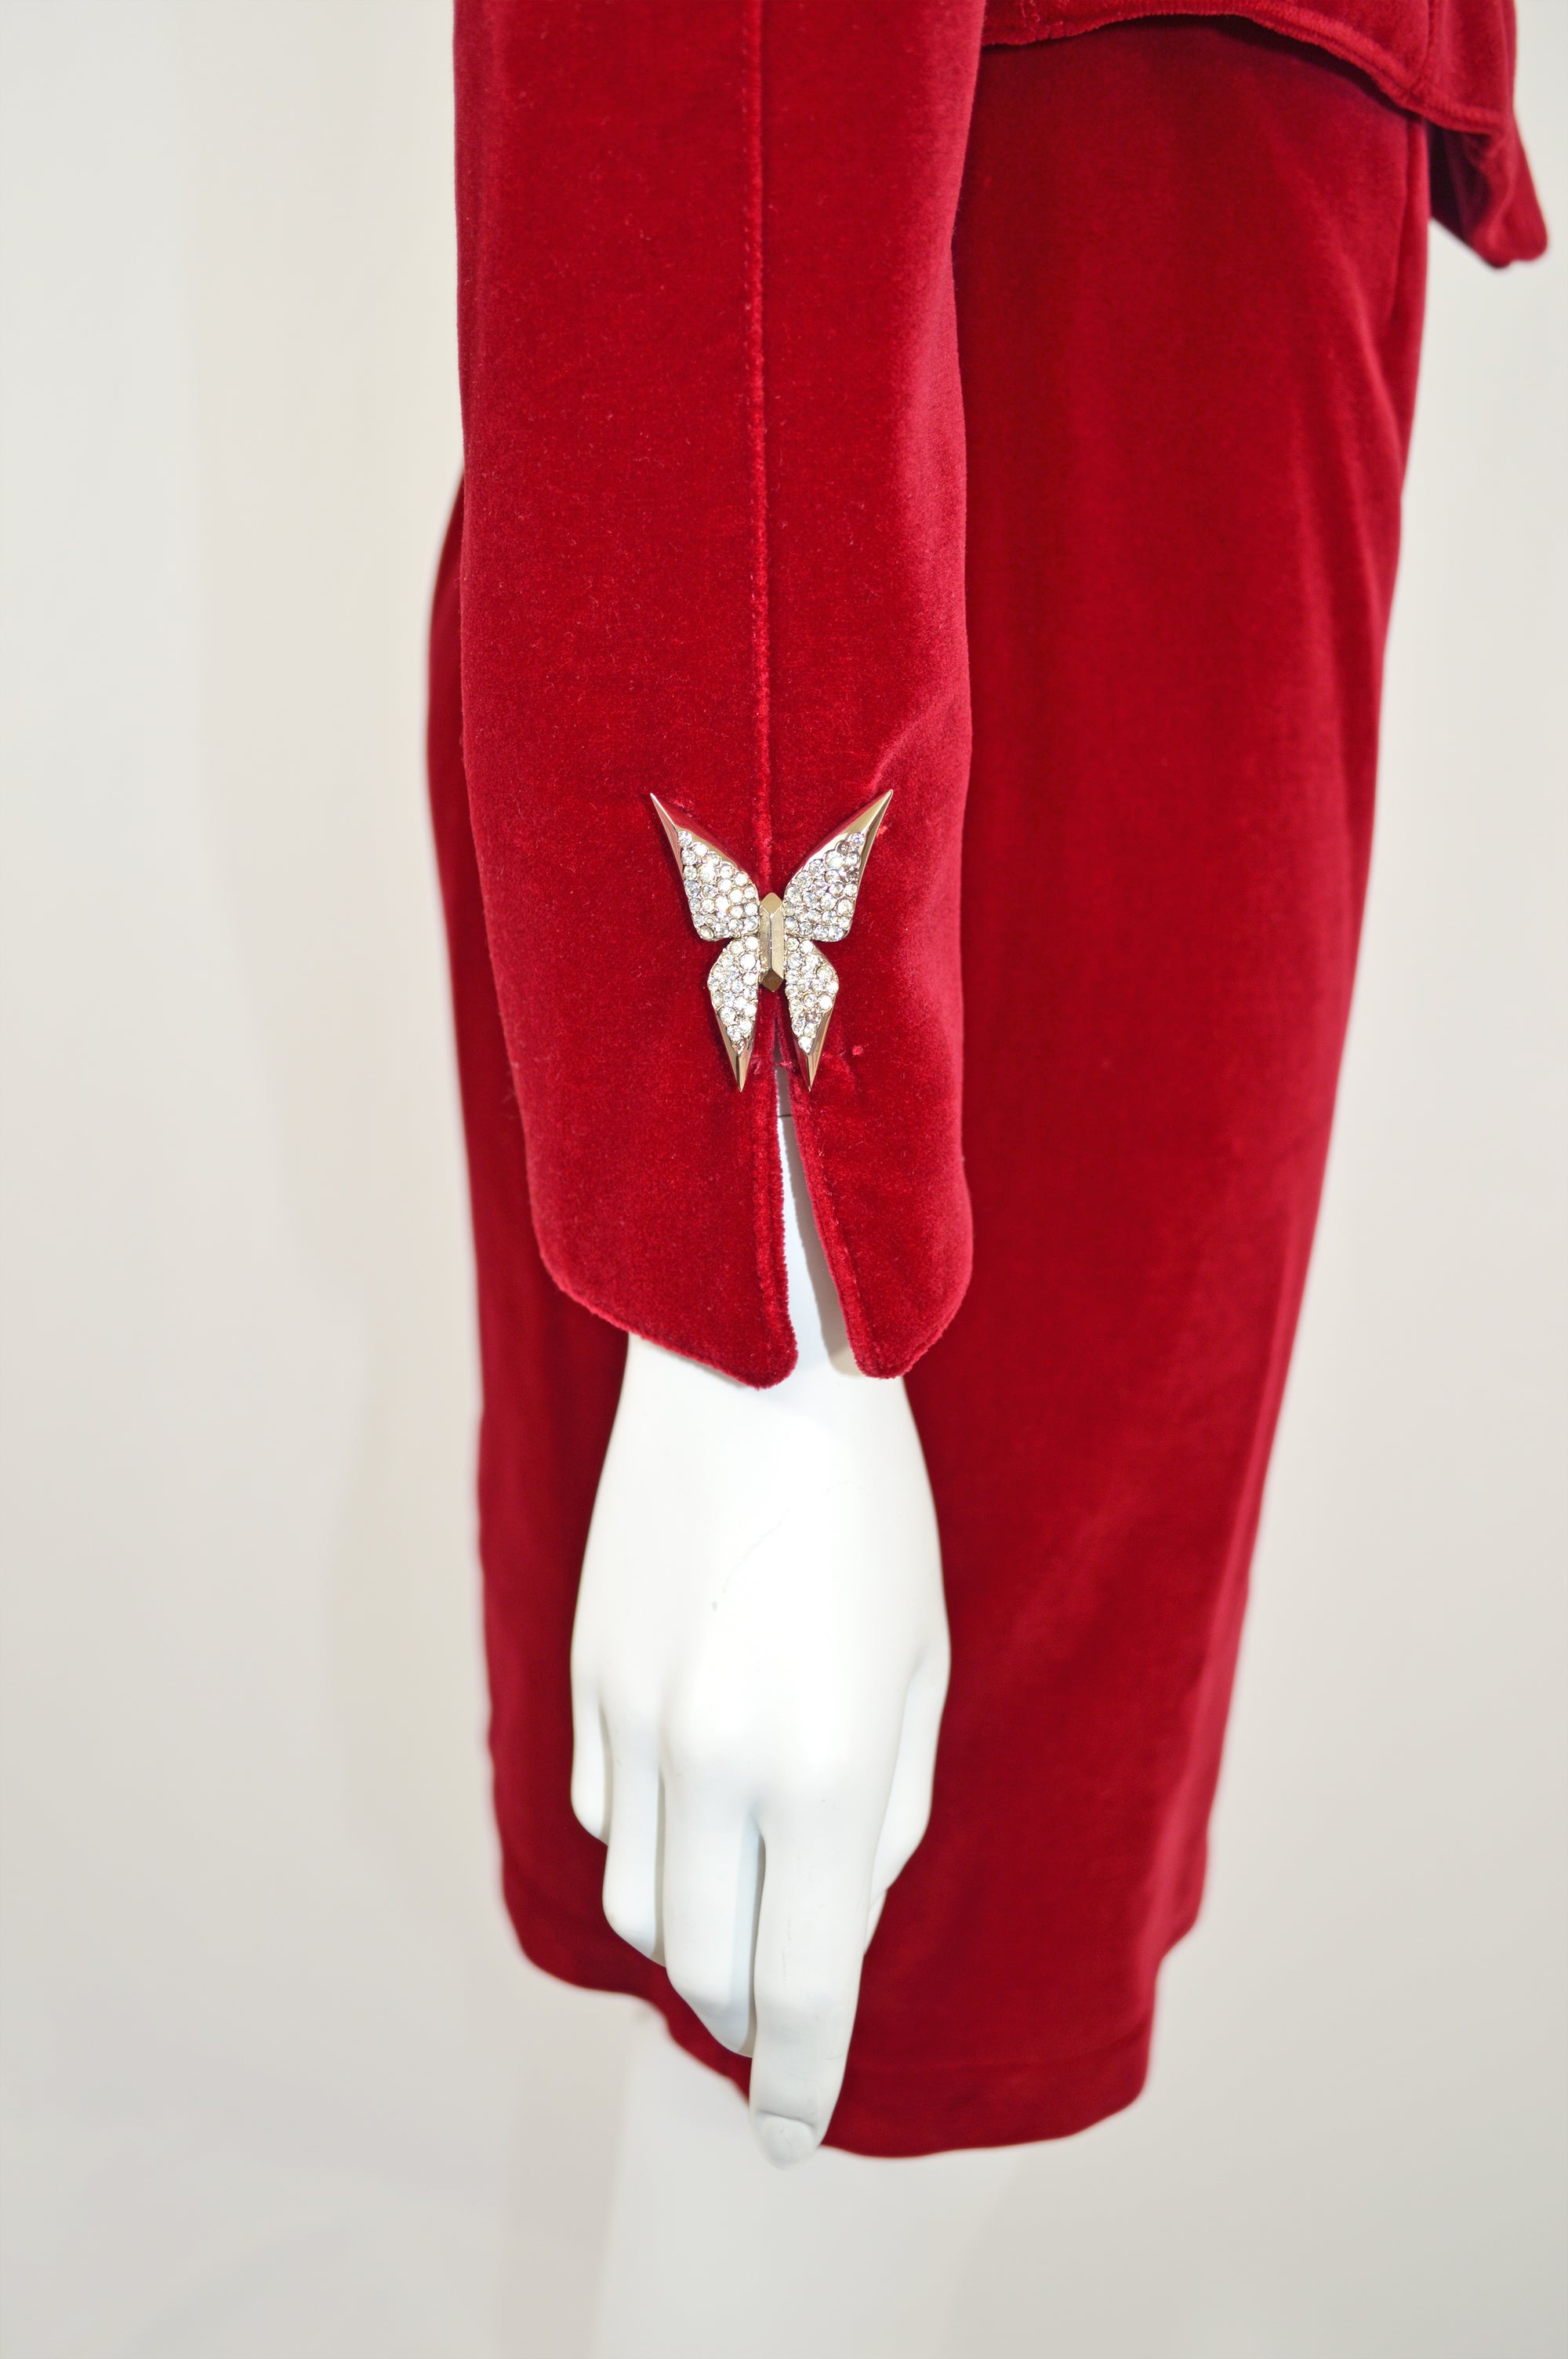 Thierry Mugler Velvet Skirt Suit with Butterfly Accents